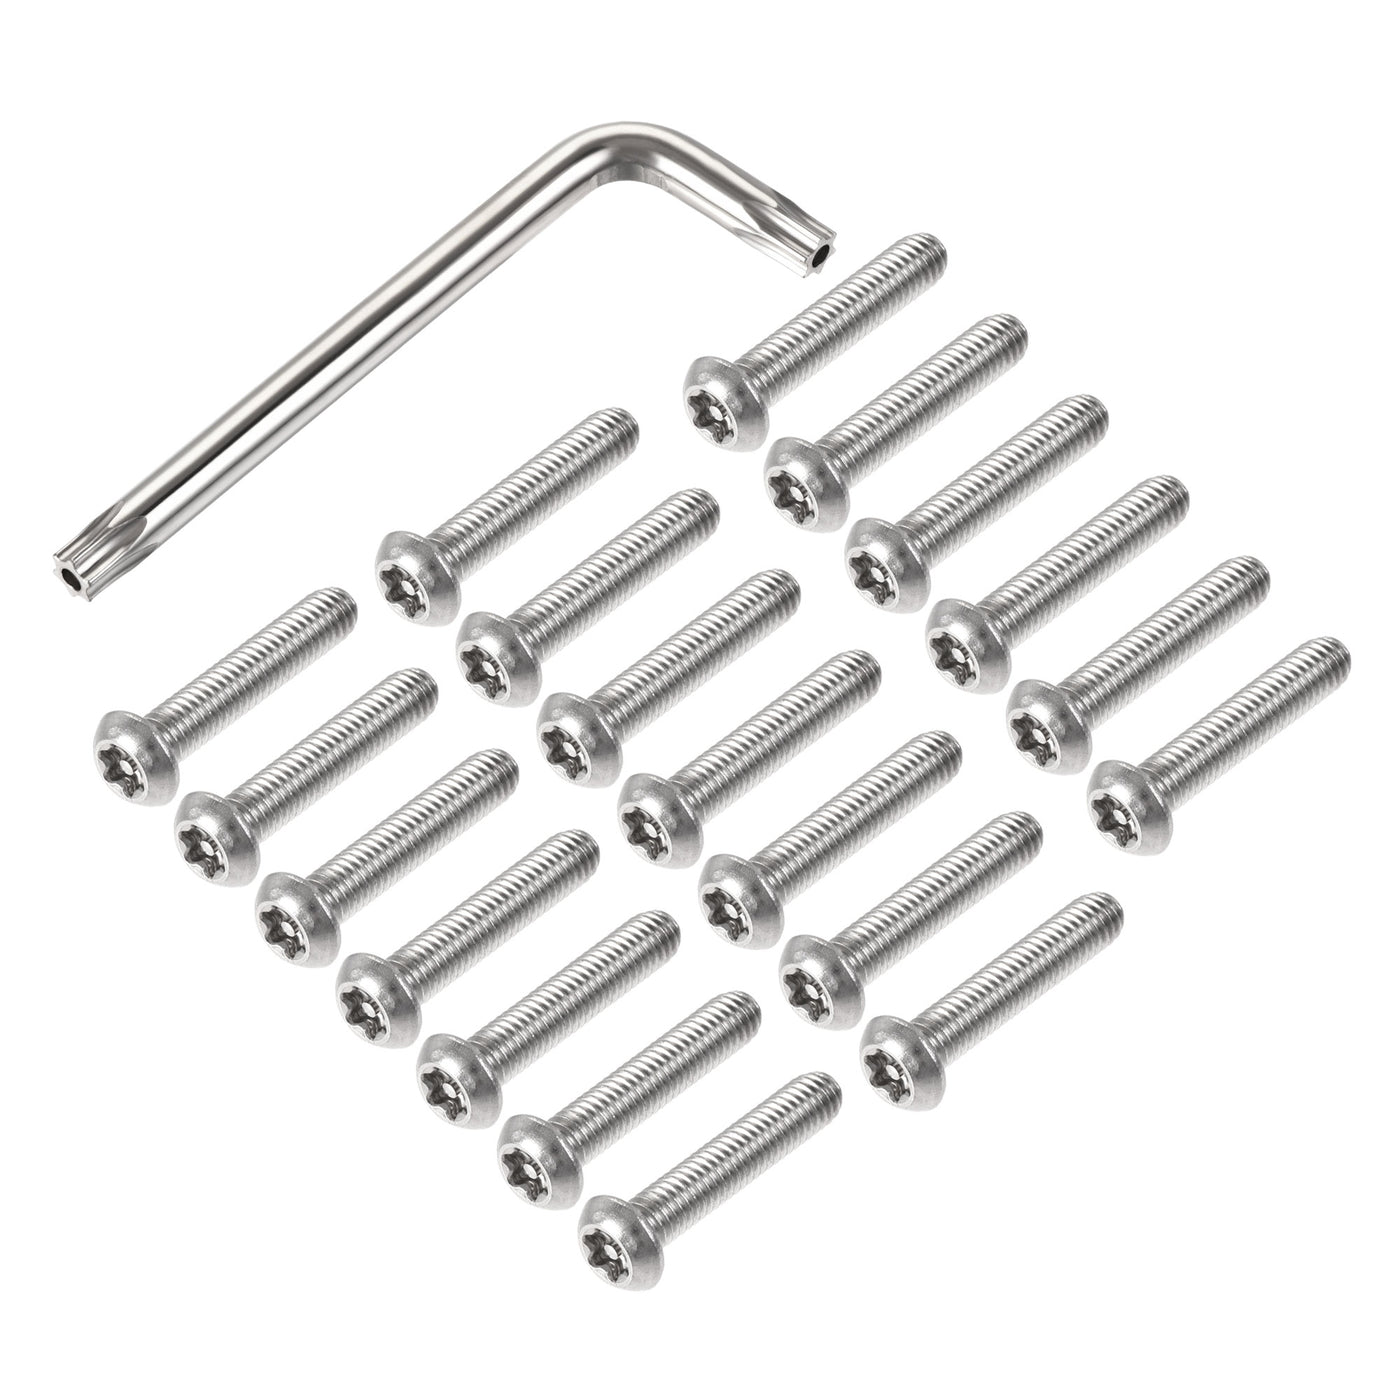 uxcell Uxcell M6x30mm Torx Security Machine Screw, 20pcs Pan Head Screws Inside Column, with T30 L-Type Wrench, 304 Stainless Steel Fasteners Bolts